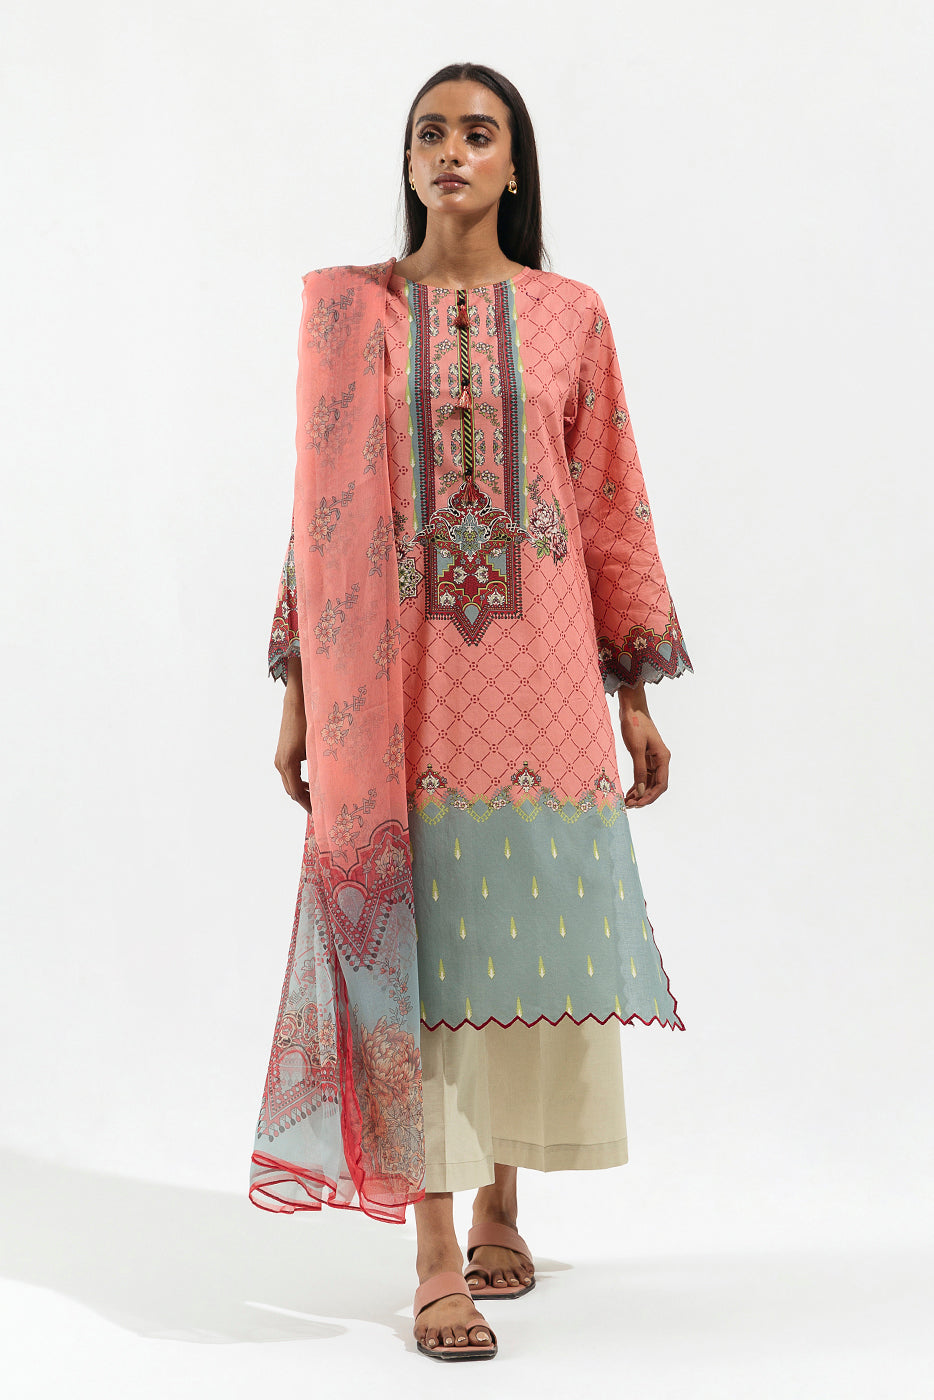 2 PIECE - PRINTED LAWN SUIT - FOLK TREASURE (UNSTITCHED) - BEECHTREE